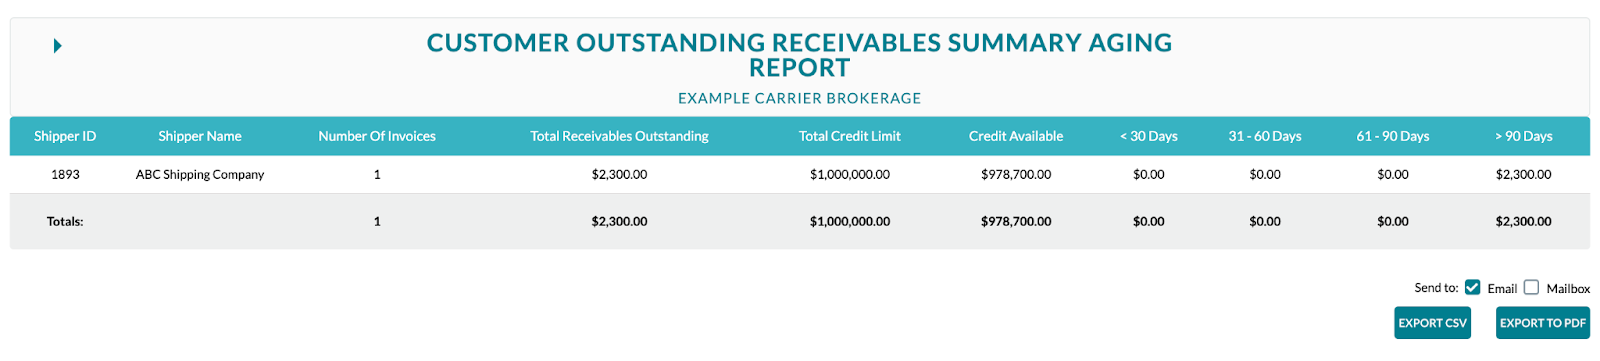 customer_outstanding_receivables_summary_ctms_2.png